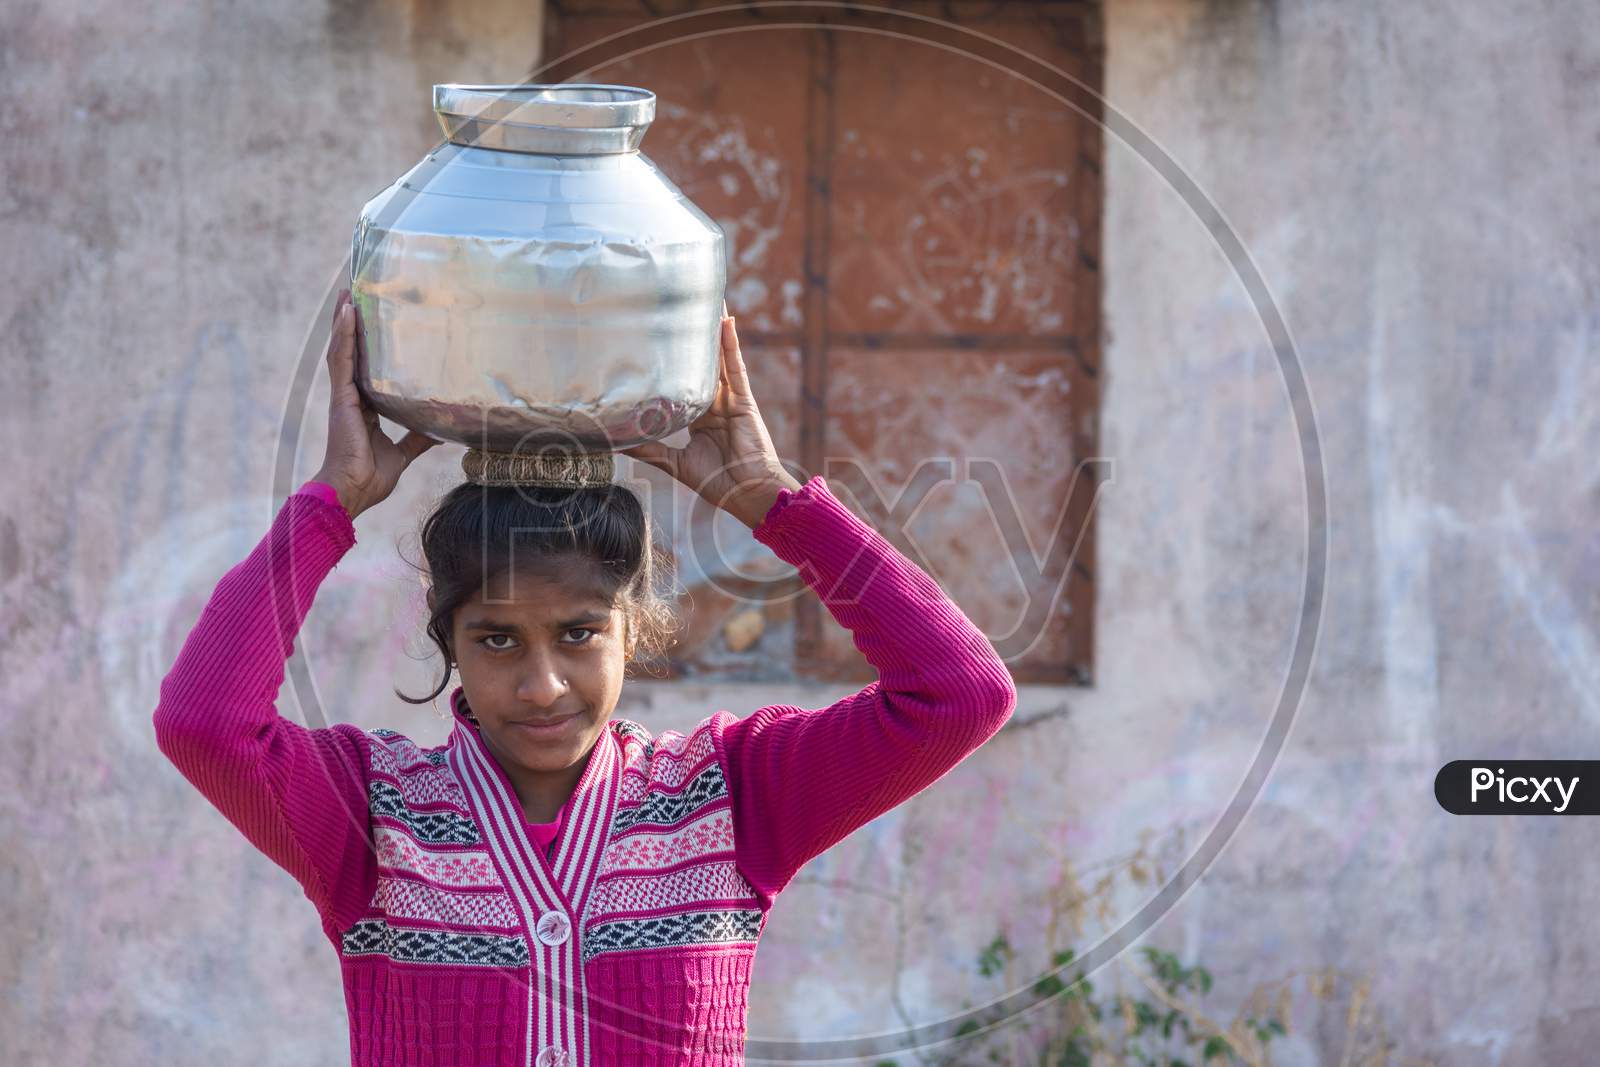 TIKAMGARH, MADHYA PRADESH, INDIA - JANUARY 23, 2021: An unidentified indian village girl carry water on their heads in traditional pots from well, An Indian rural scene.